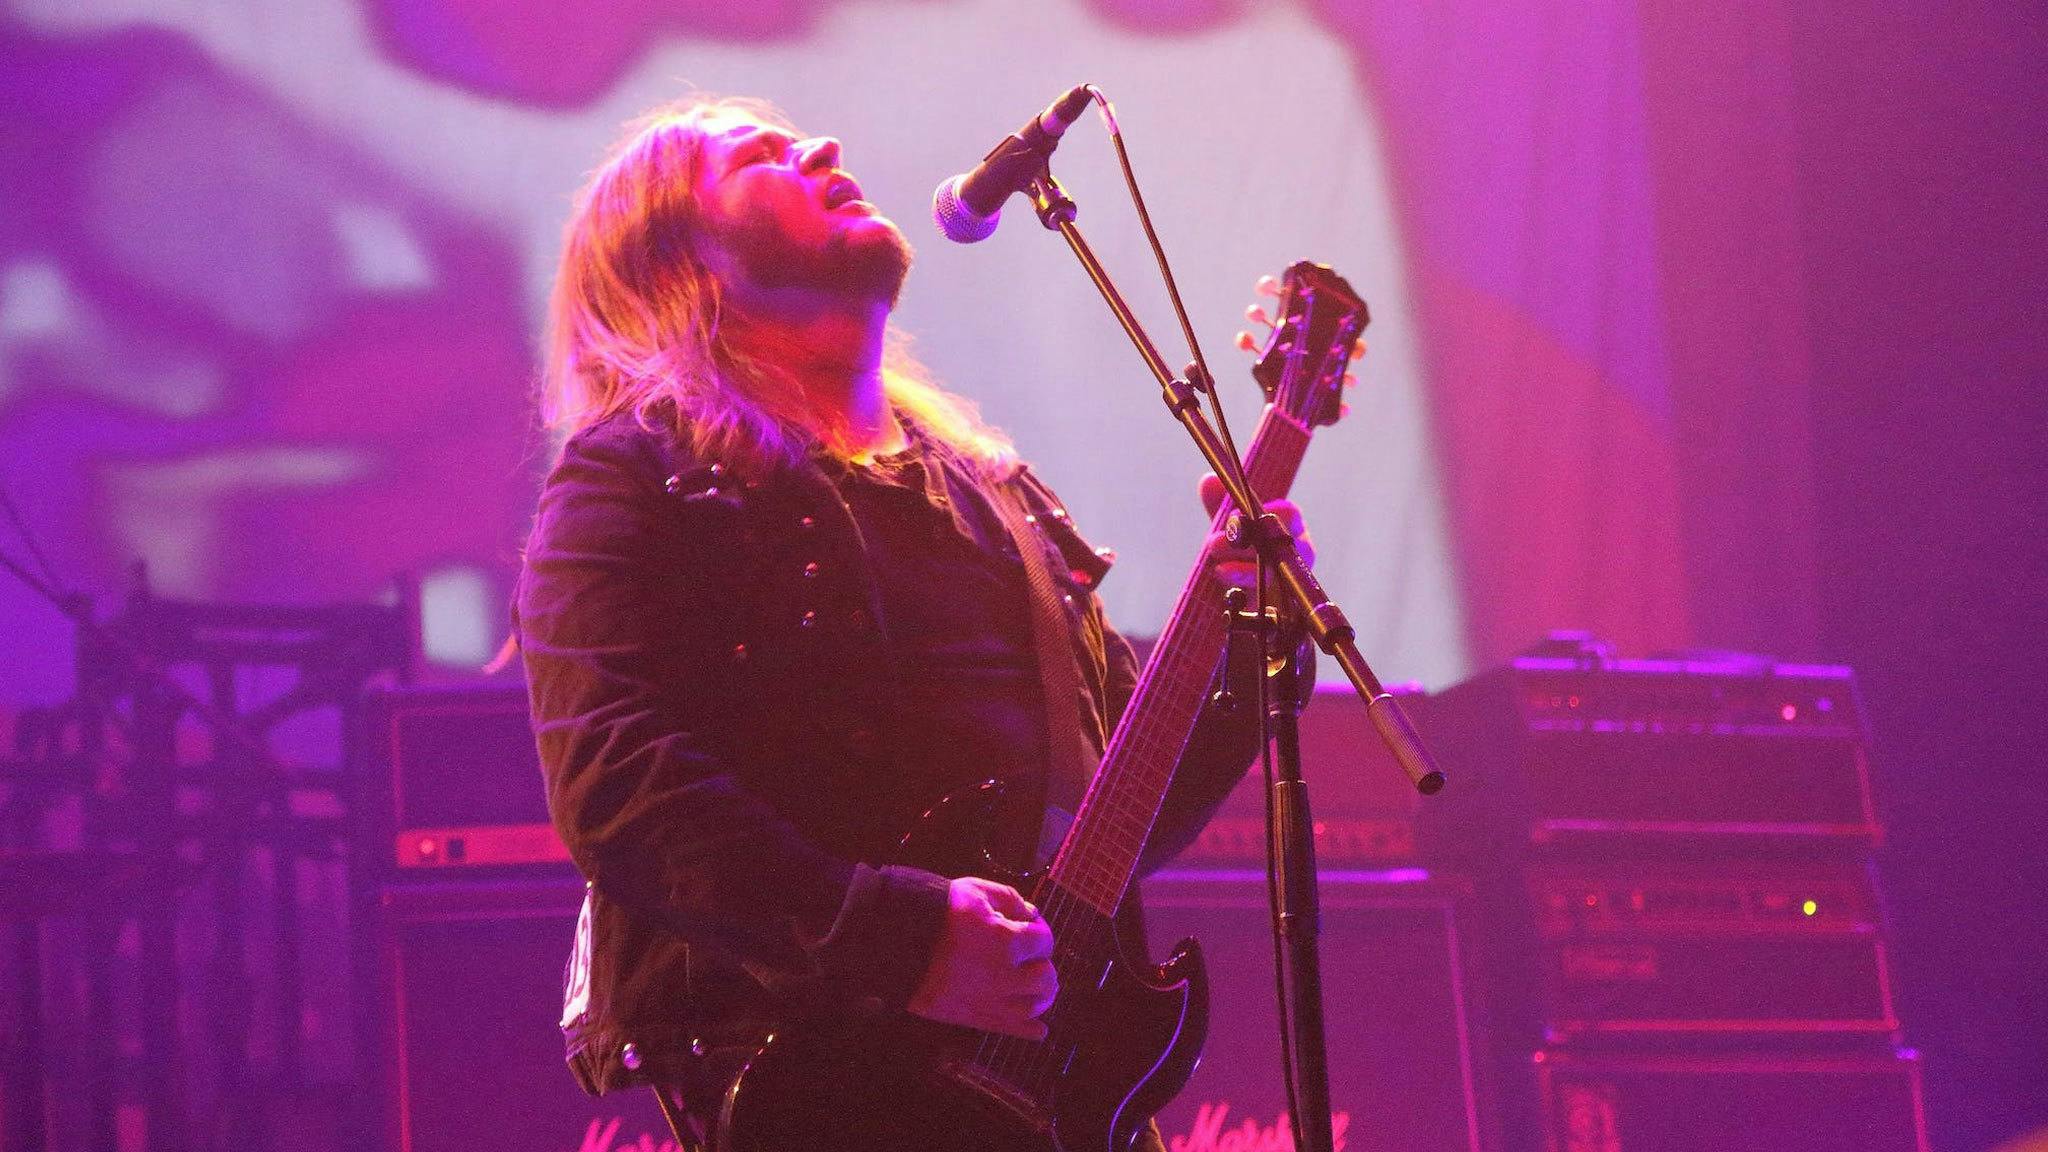 Damnation Festival announces headliners Electric Wizard, and a special Enslaved set